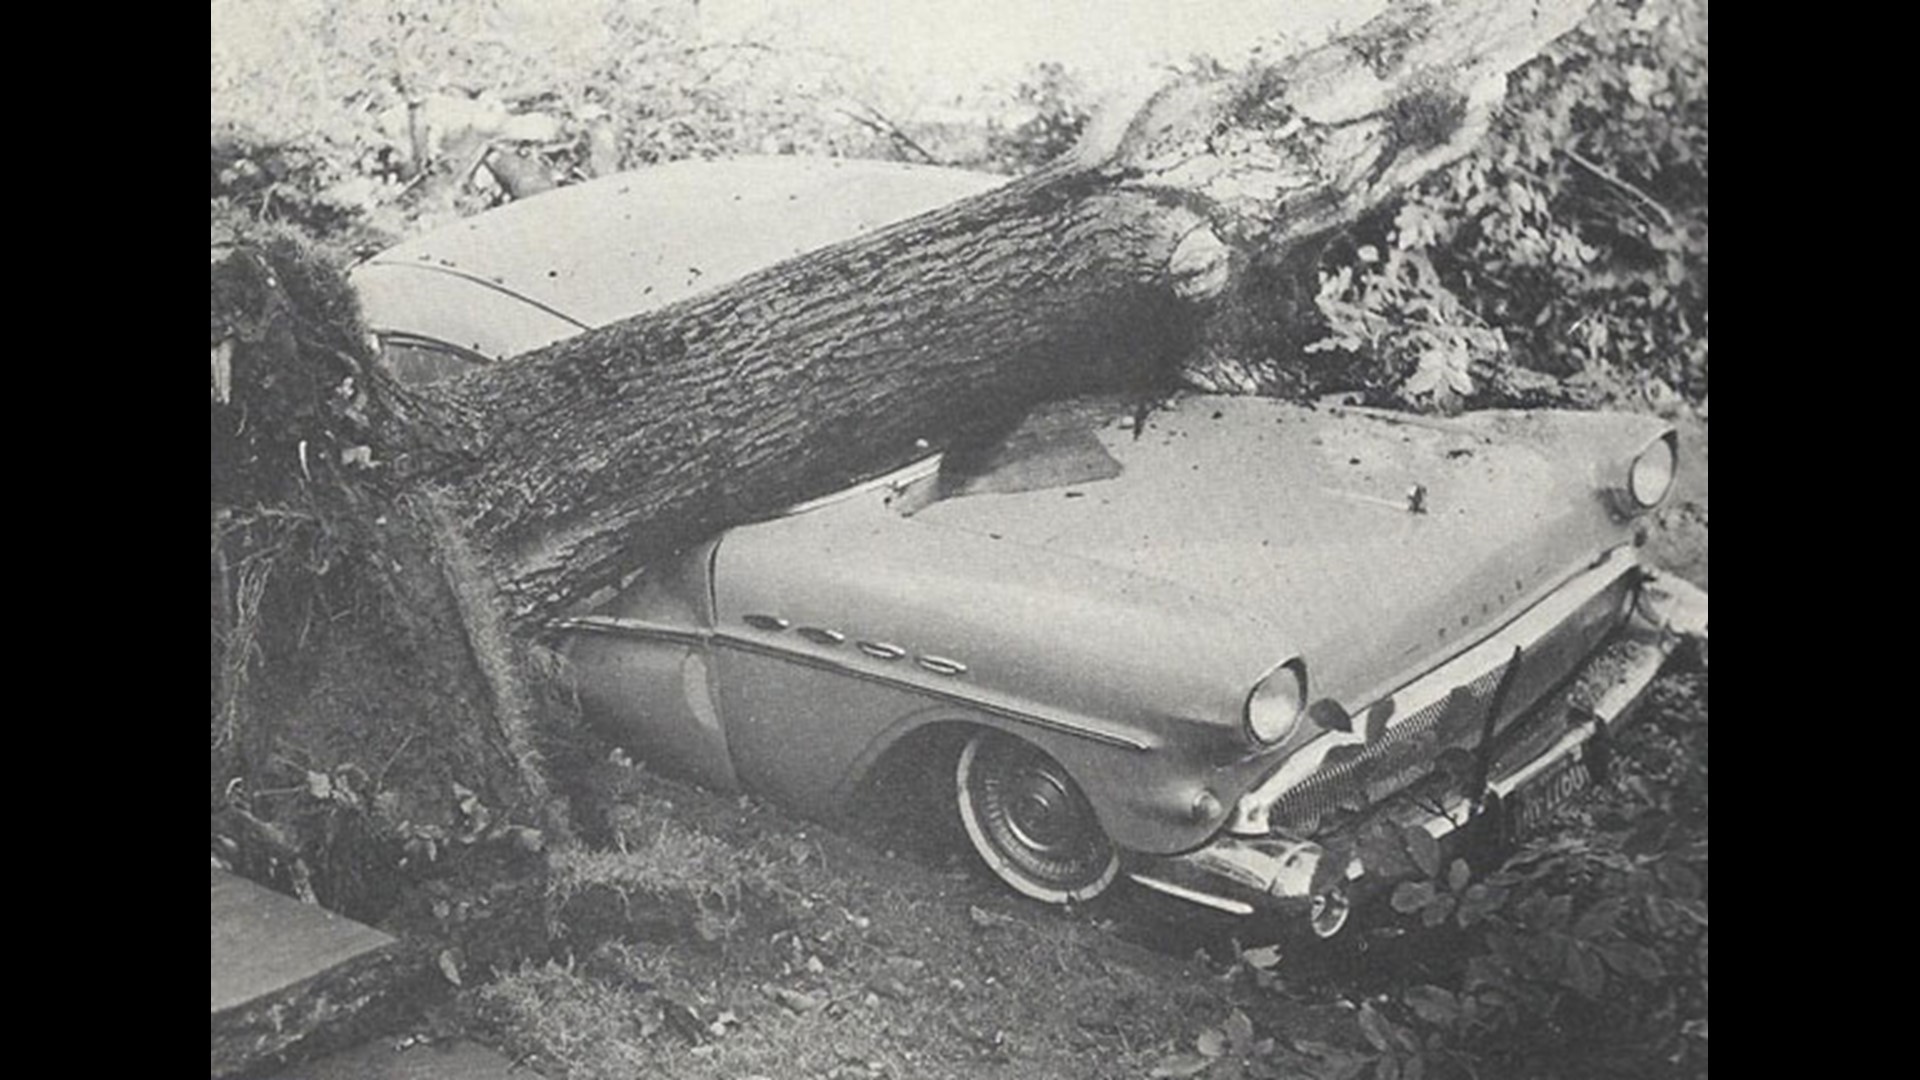 Monday marks the 60th anniversary of the 1962 Columbus Day storm that brought 150 mph wind gusts to parts of Washington.